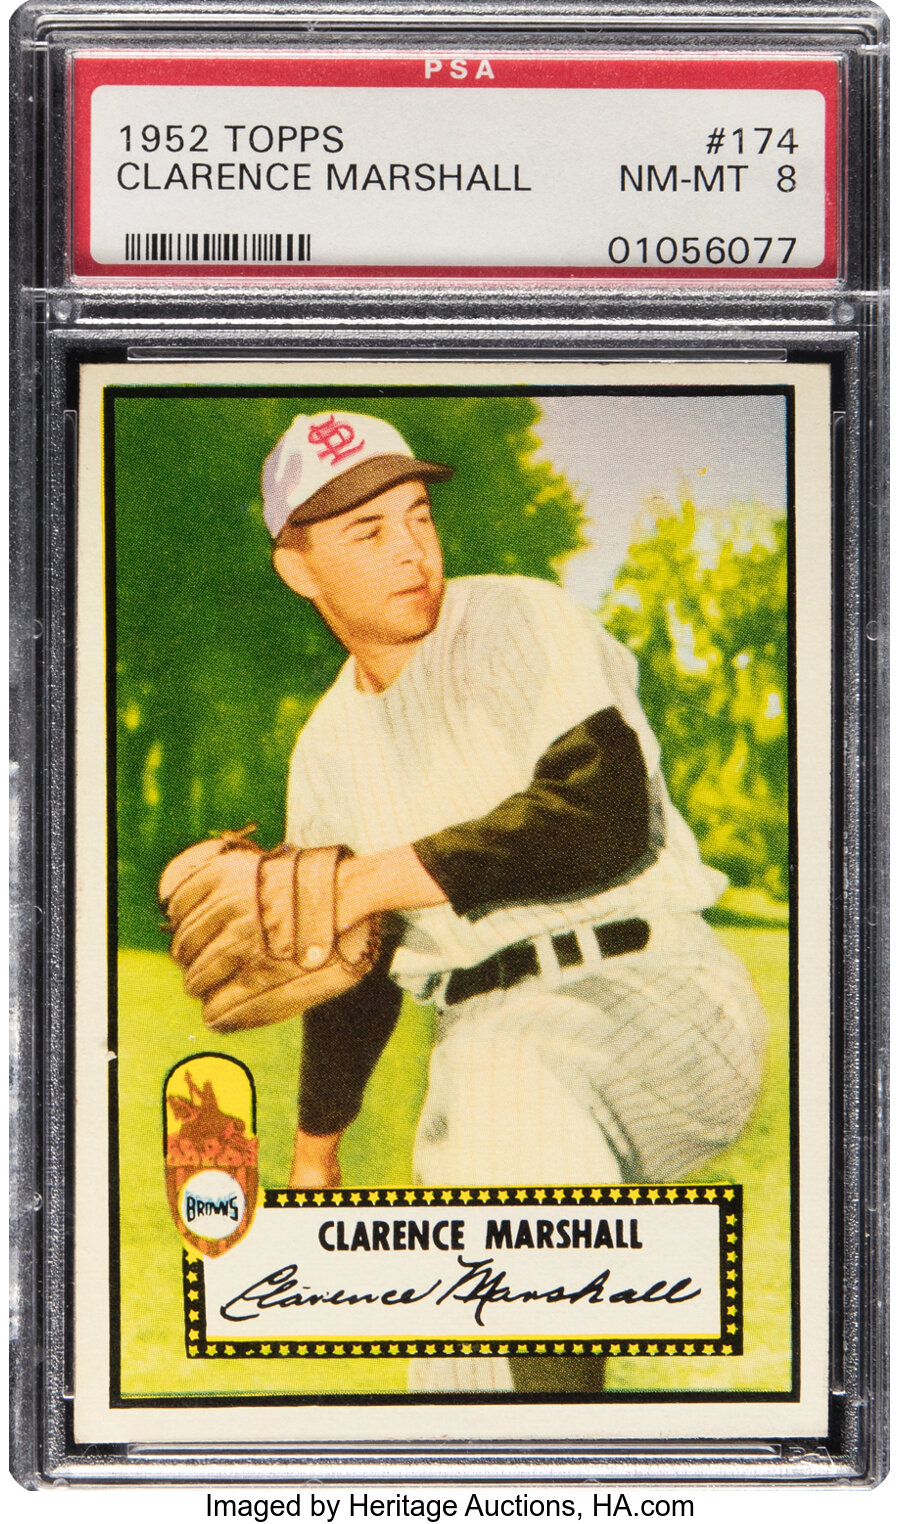 1952 Topps Clarence Marshall Rookie #174 PSA NM-MT 8 - Three Higher!